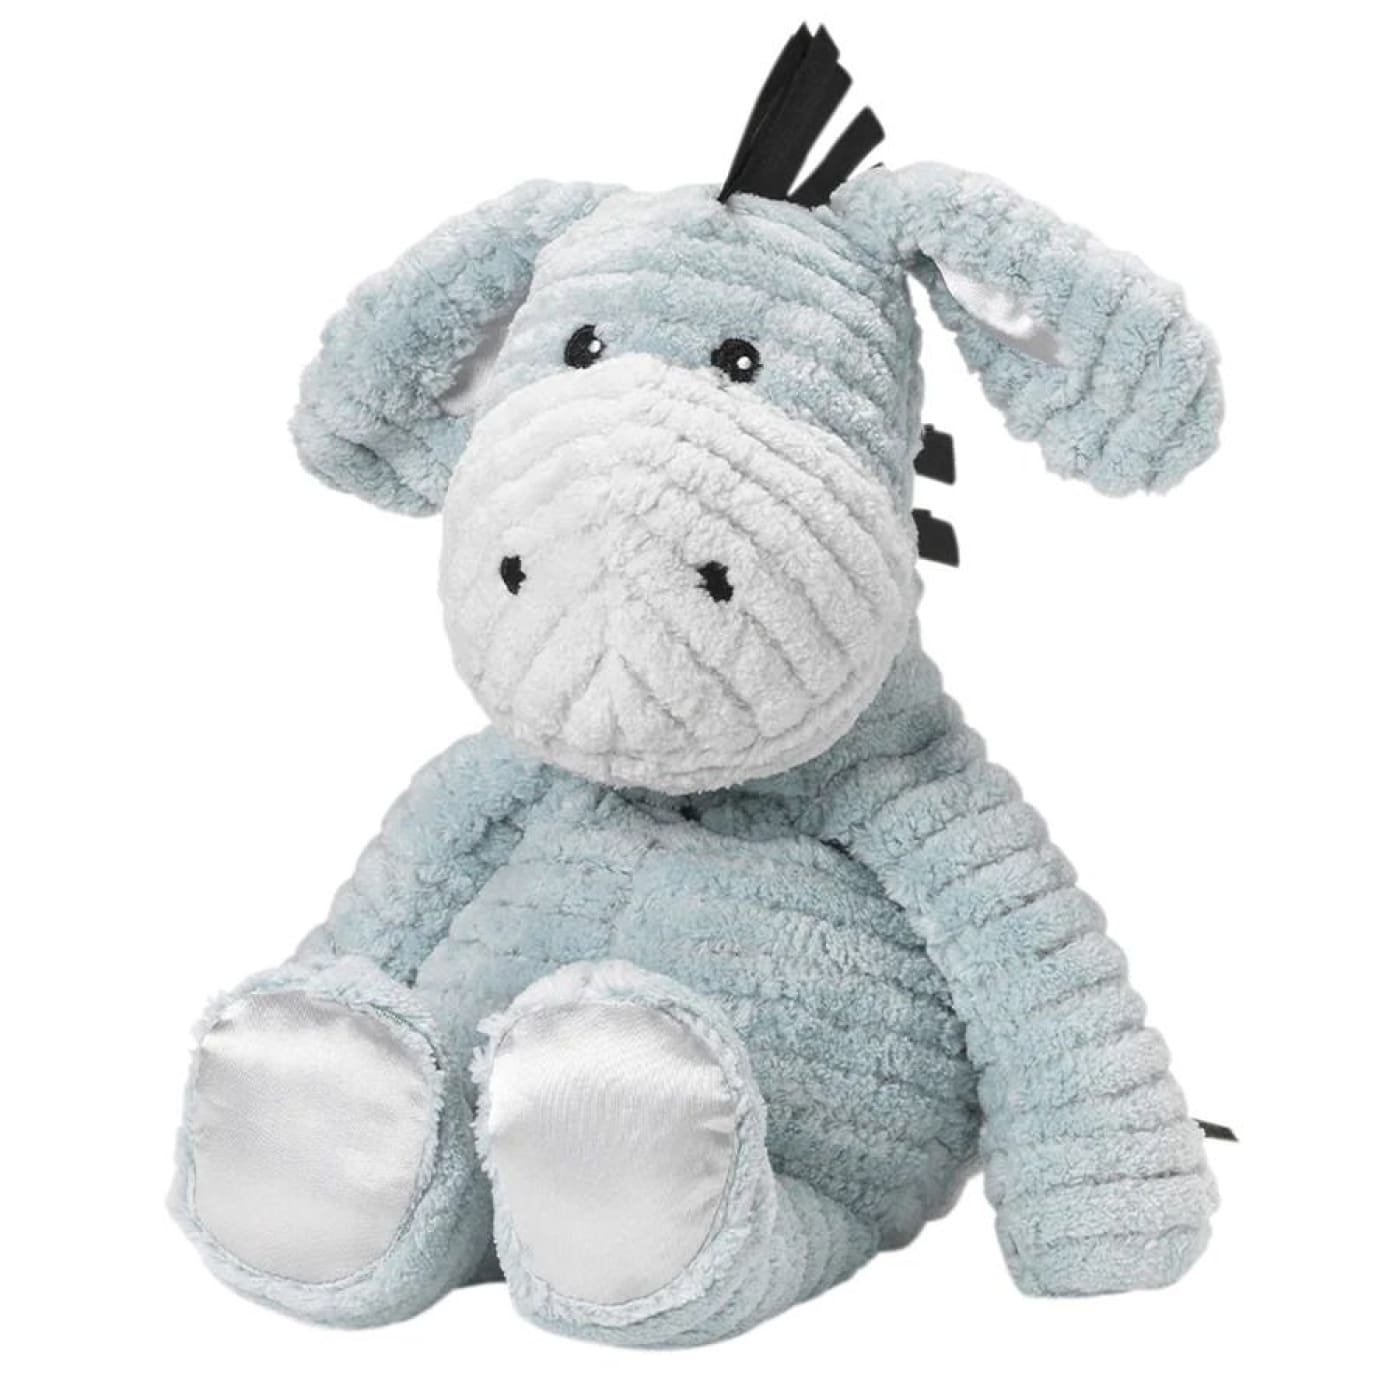 Warmies My First Heatable Soft Toy Scented with French Lavender - Donkey - Donkey - HEALTH & HOME SAFETY - THERMOMETERS/MEDICINAL